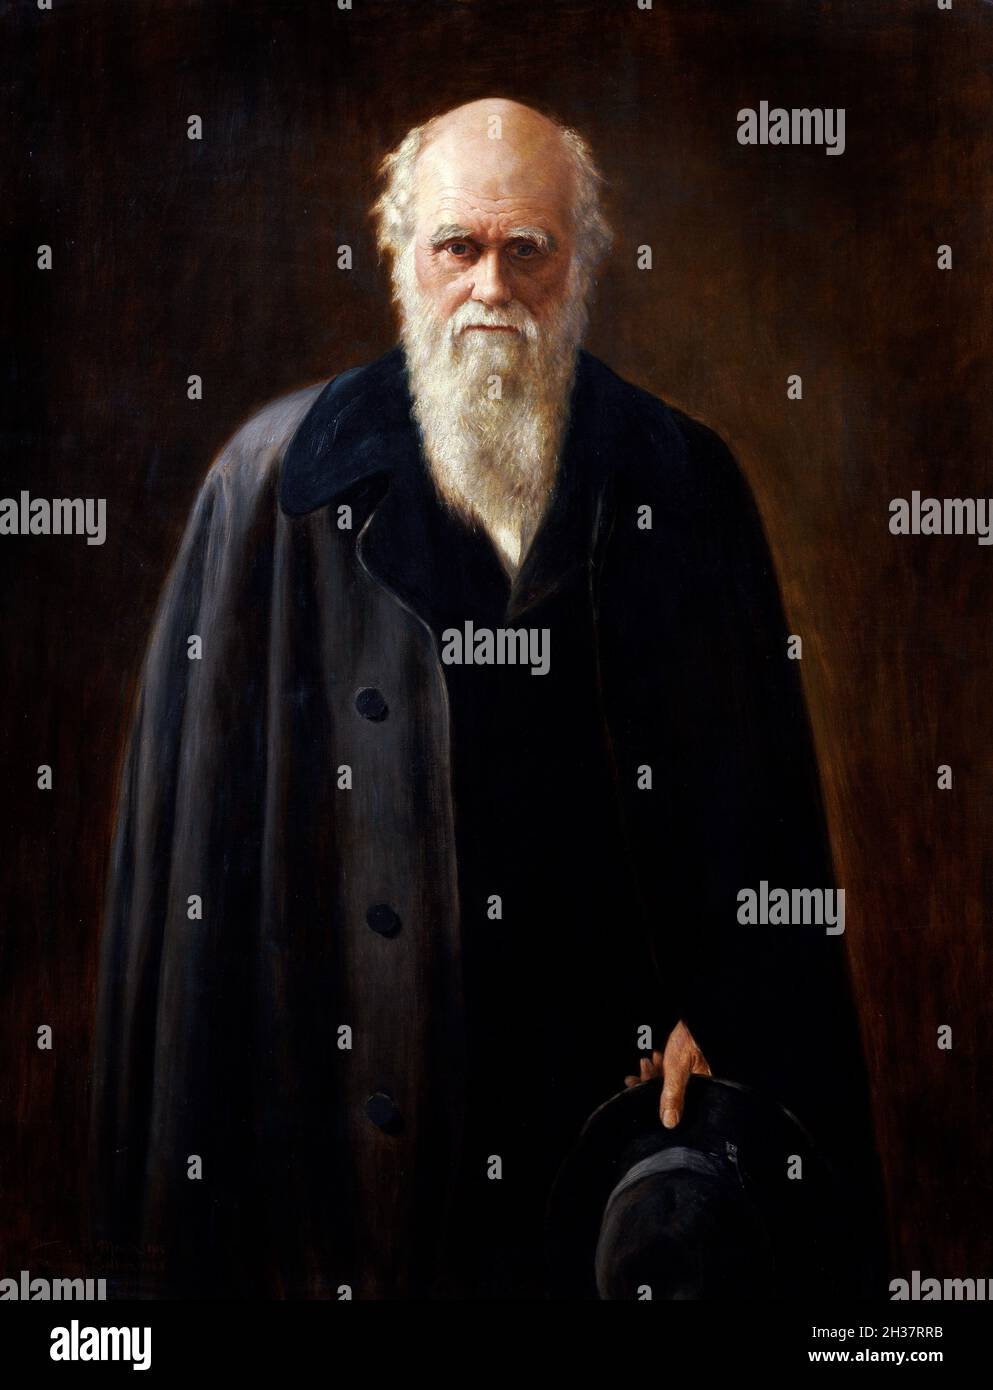 Charles Darwin. Portrait of the English naturalist, Charles Darwin (1809-1882) by Mabel Beatrice Messer, oi on canvas, 1912. The painting is a copy of a work by John Collier Stock Photo